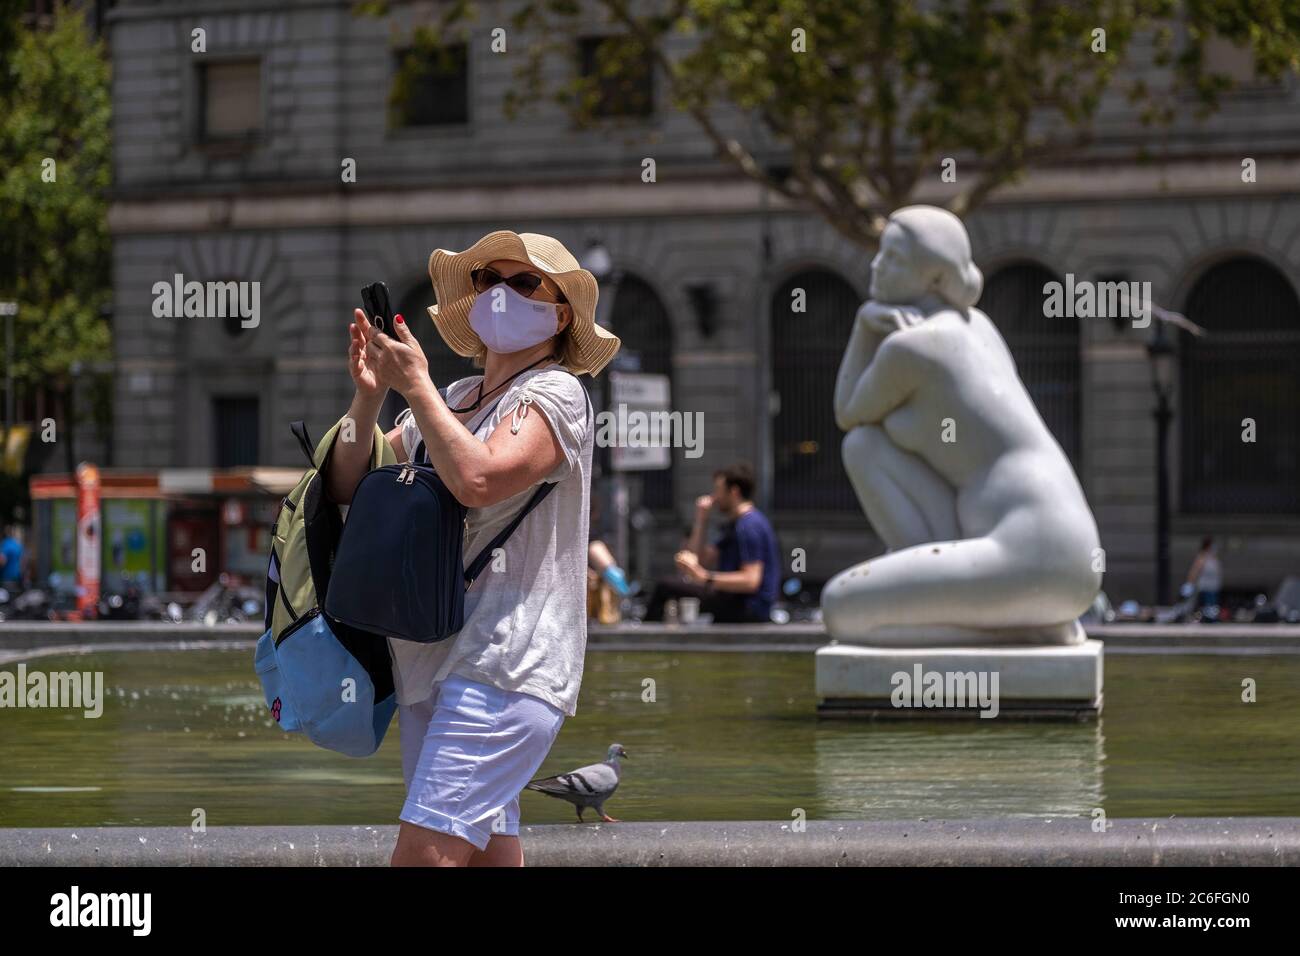 A person taking a selfie next to the sculpture La Diosa by the sculptor Josep Clarà i Ayats in Plaza Catalunya while wearing a face mask as a precaution against the spread of the coronavirus during the pandemic.Catalonia will fine whoever does not wear a sanitary mask in public space with 100 euros, as a measure due to the Covid-19 outbreak. Stock Photo